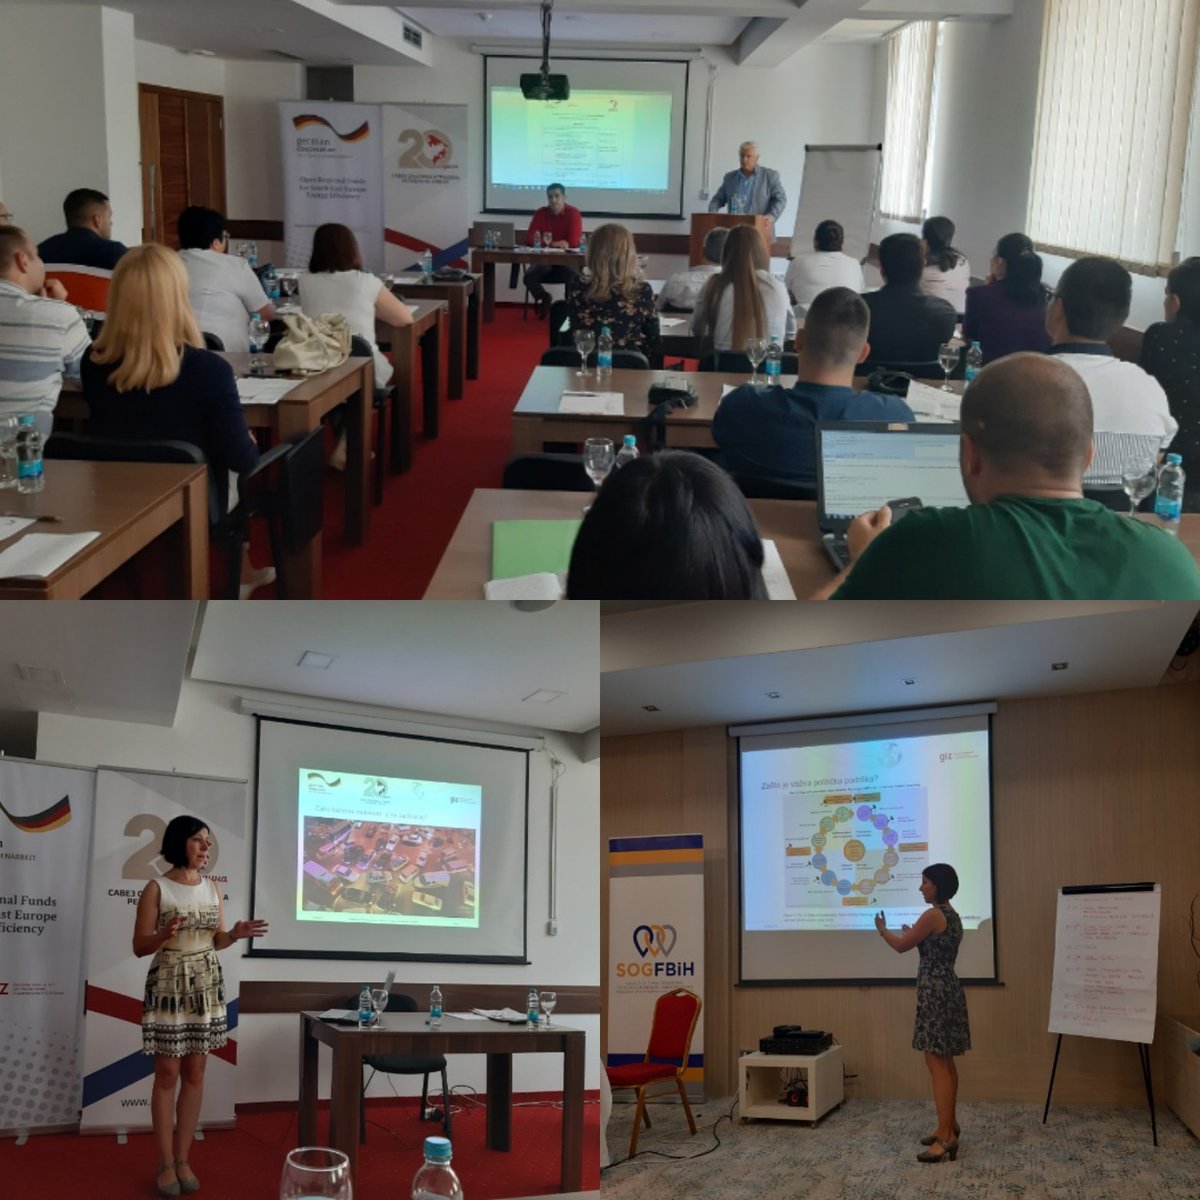 Interesting week. Presenting on several workshops about SUMP development and implementation for cities in Republic of Srpska and Bosnia and Hercegovina. #GIZ #SUMSEEC project